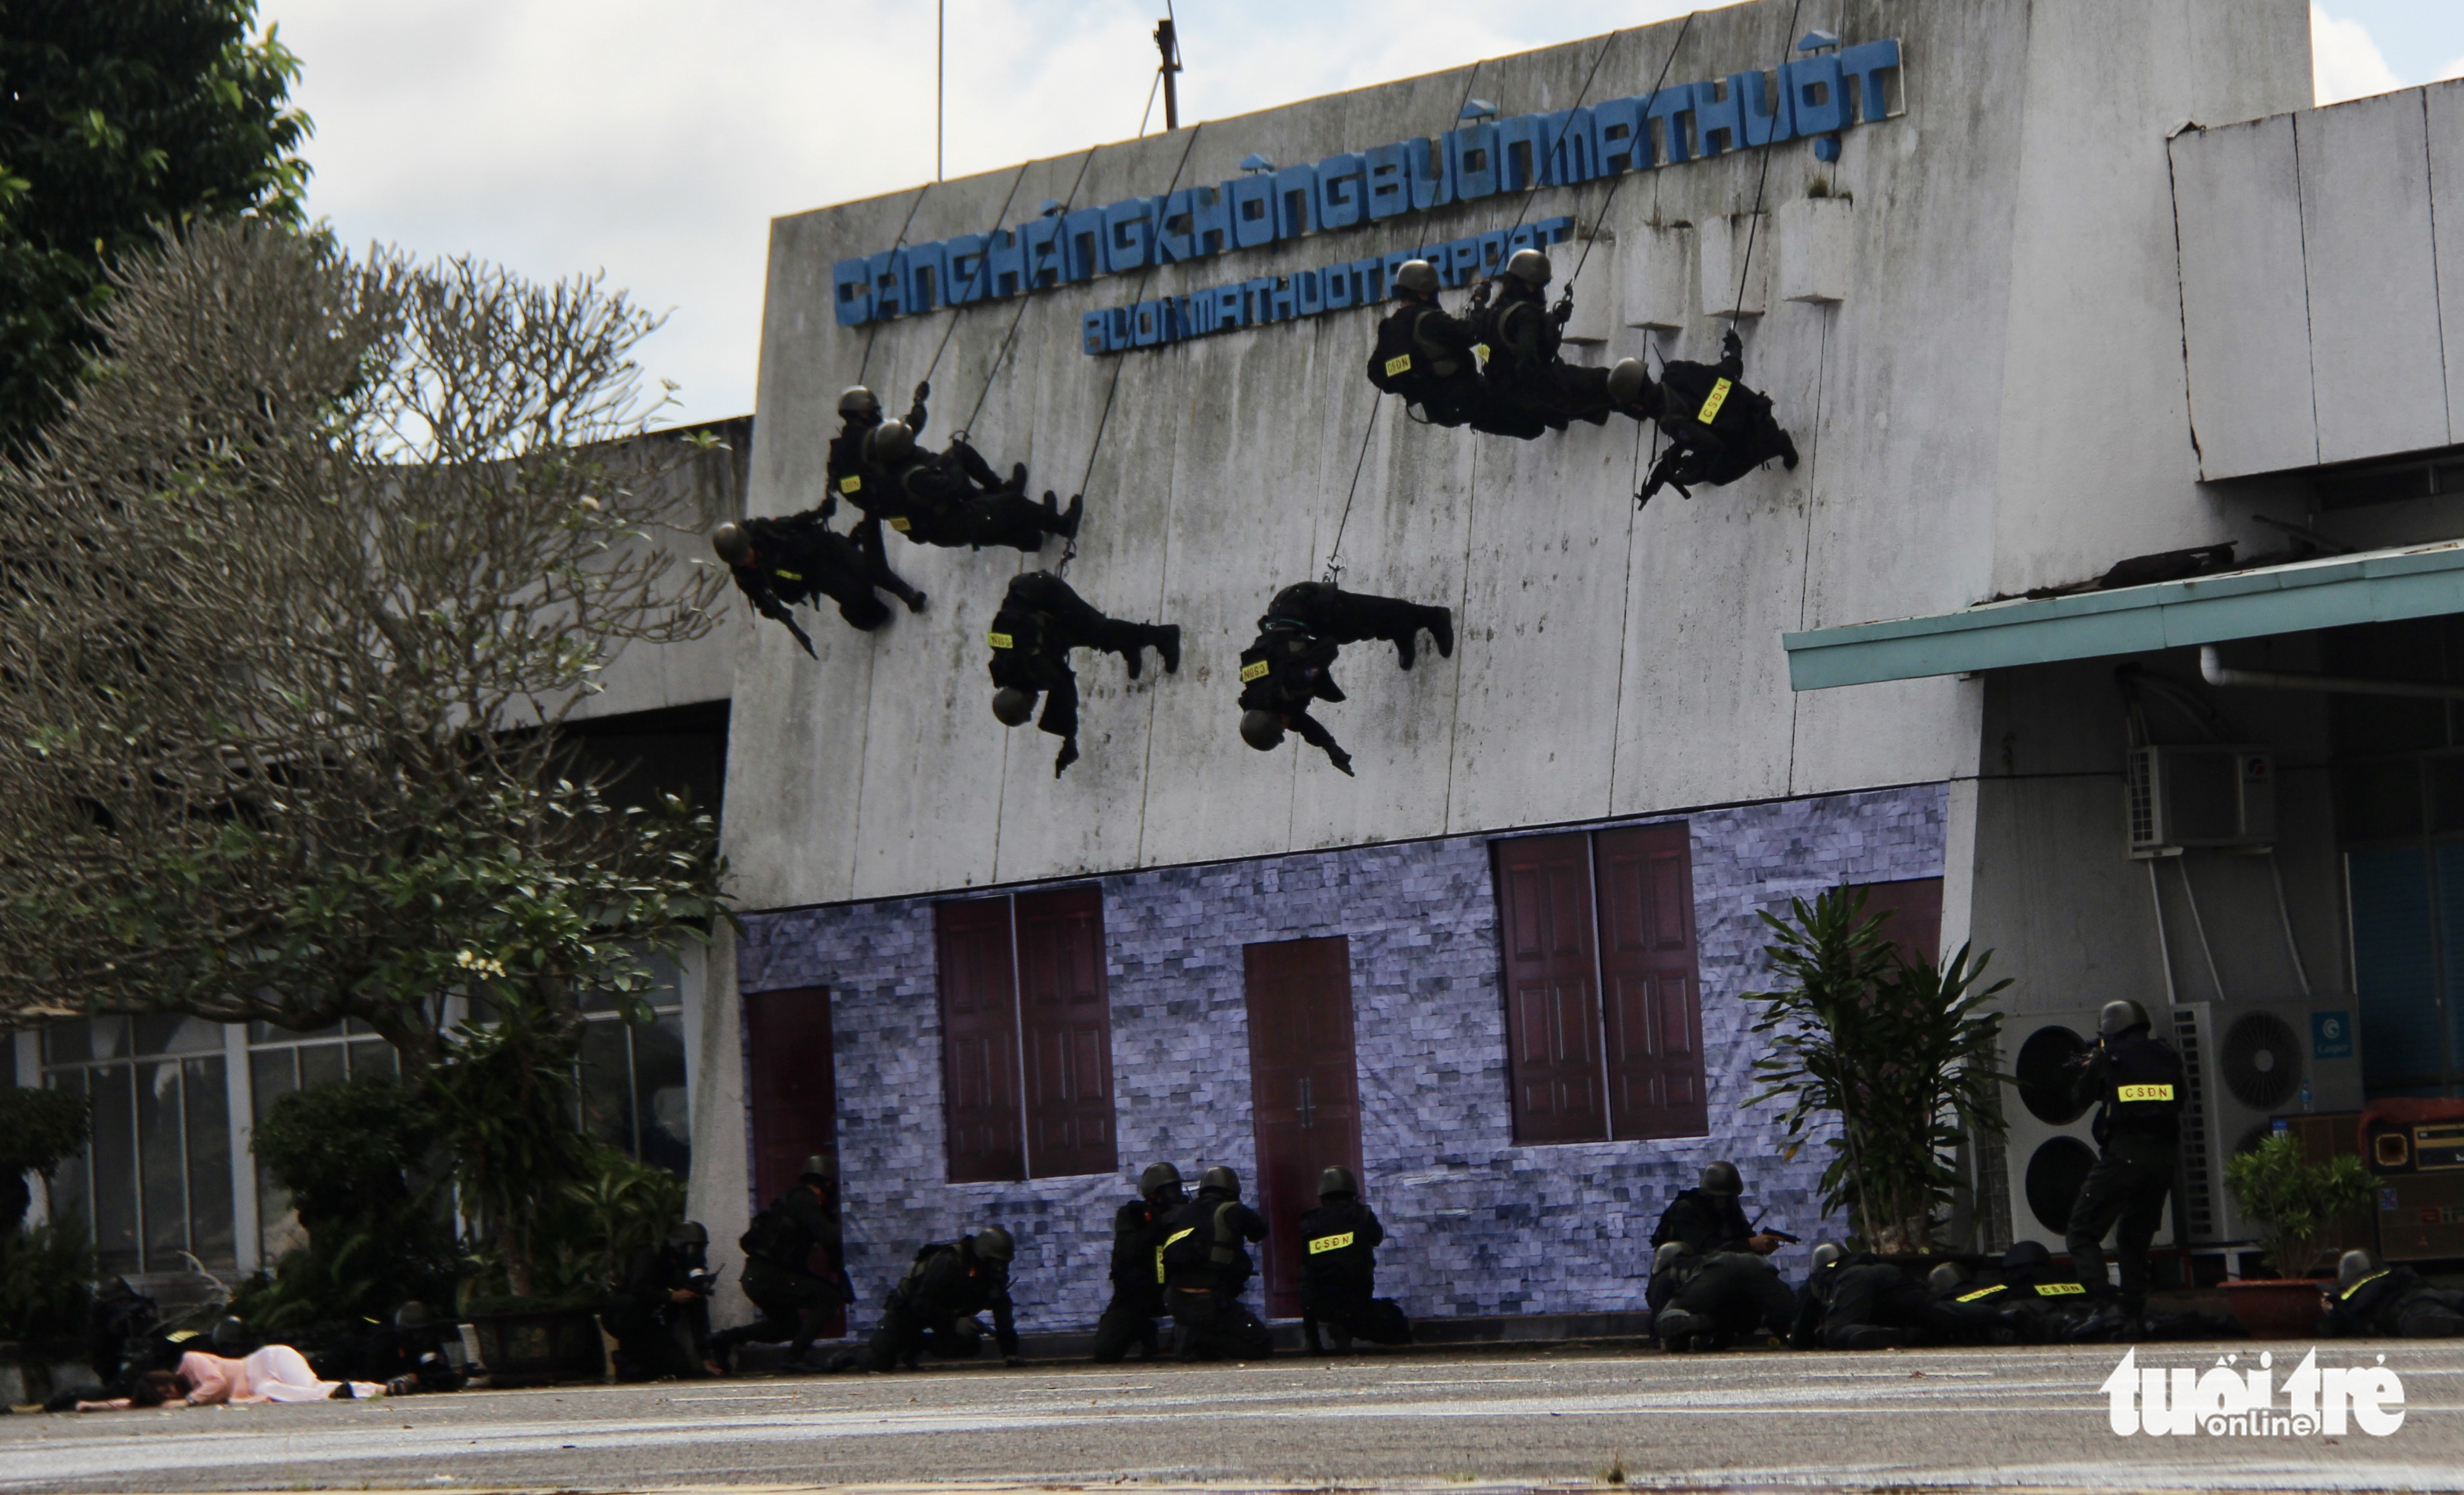 Special forces carry out their attack on the terrorists during the drill at Buon Ma Thuot Airport in Dak Lak Province, Vietnam, November 25, 2022. Photo: Trung Tan / Tuoi Tre